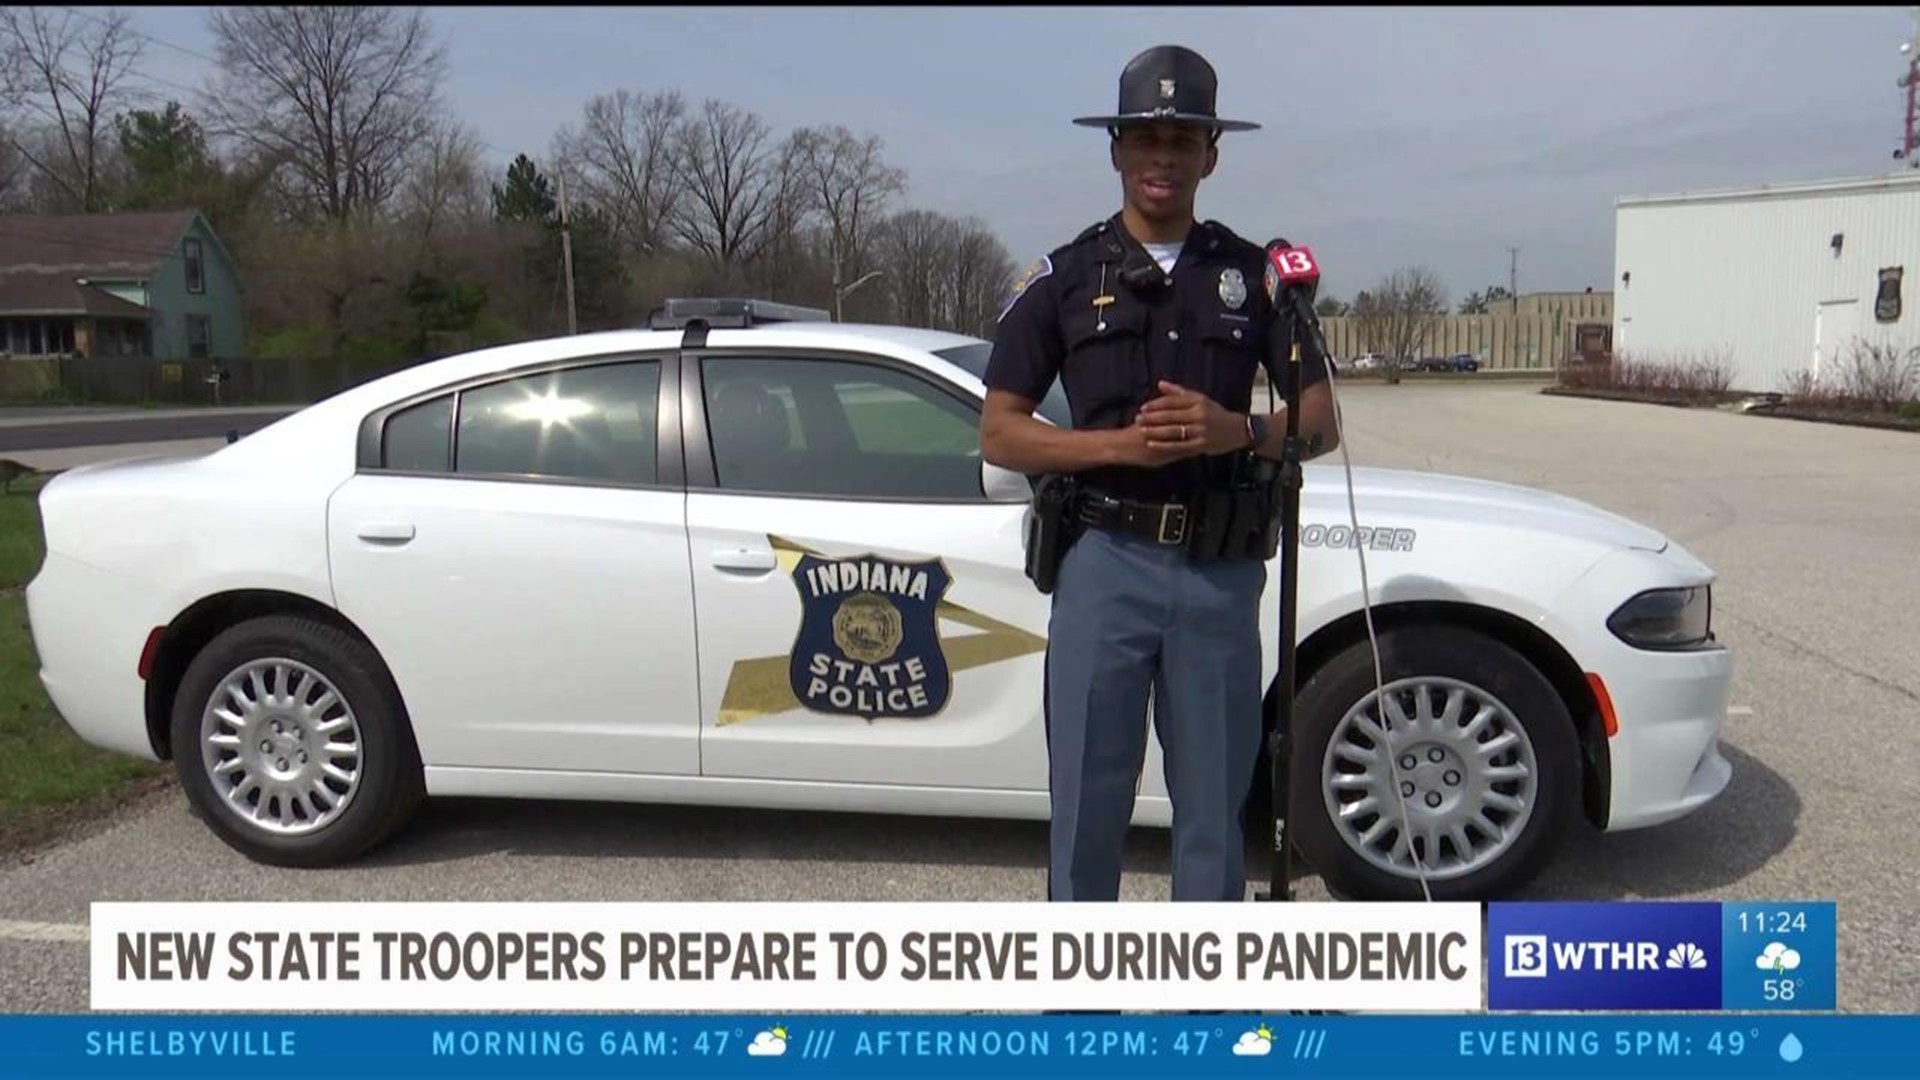 New State Troopers Prepare To Serve During Pandemic